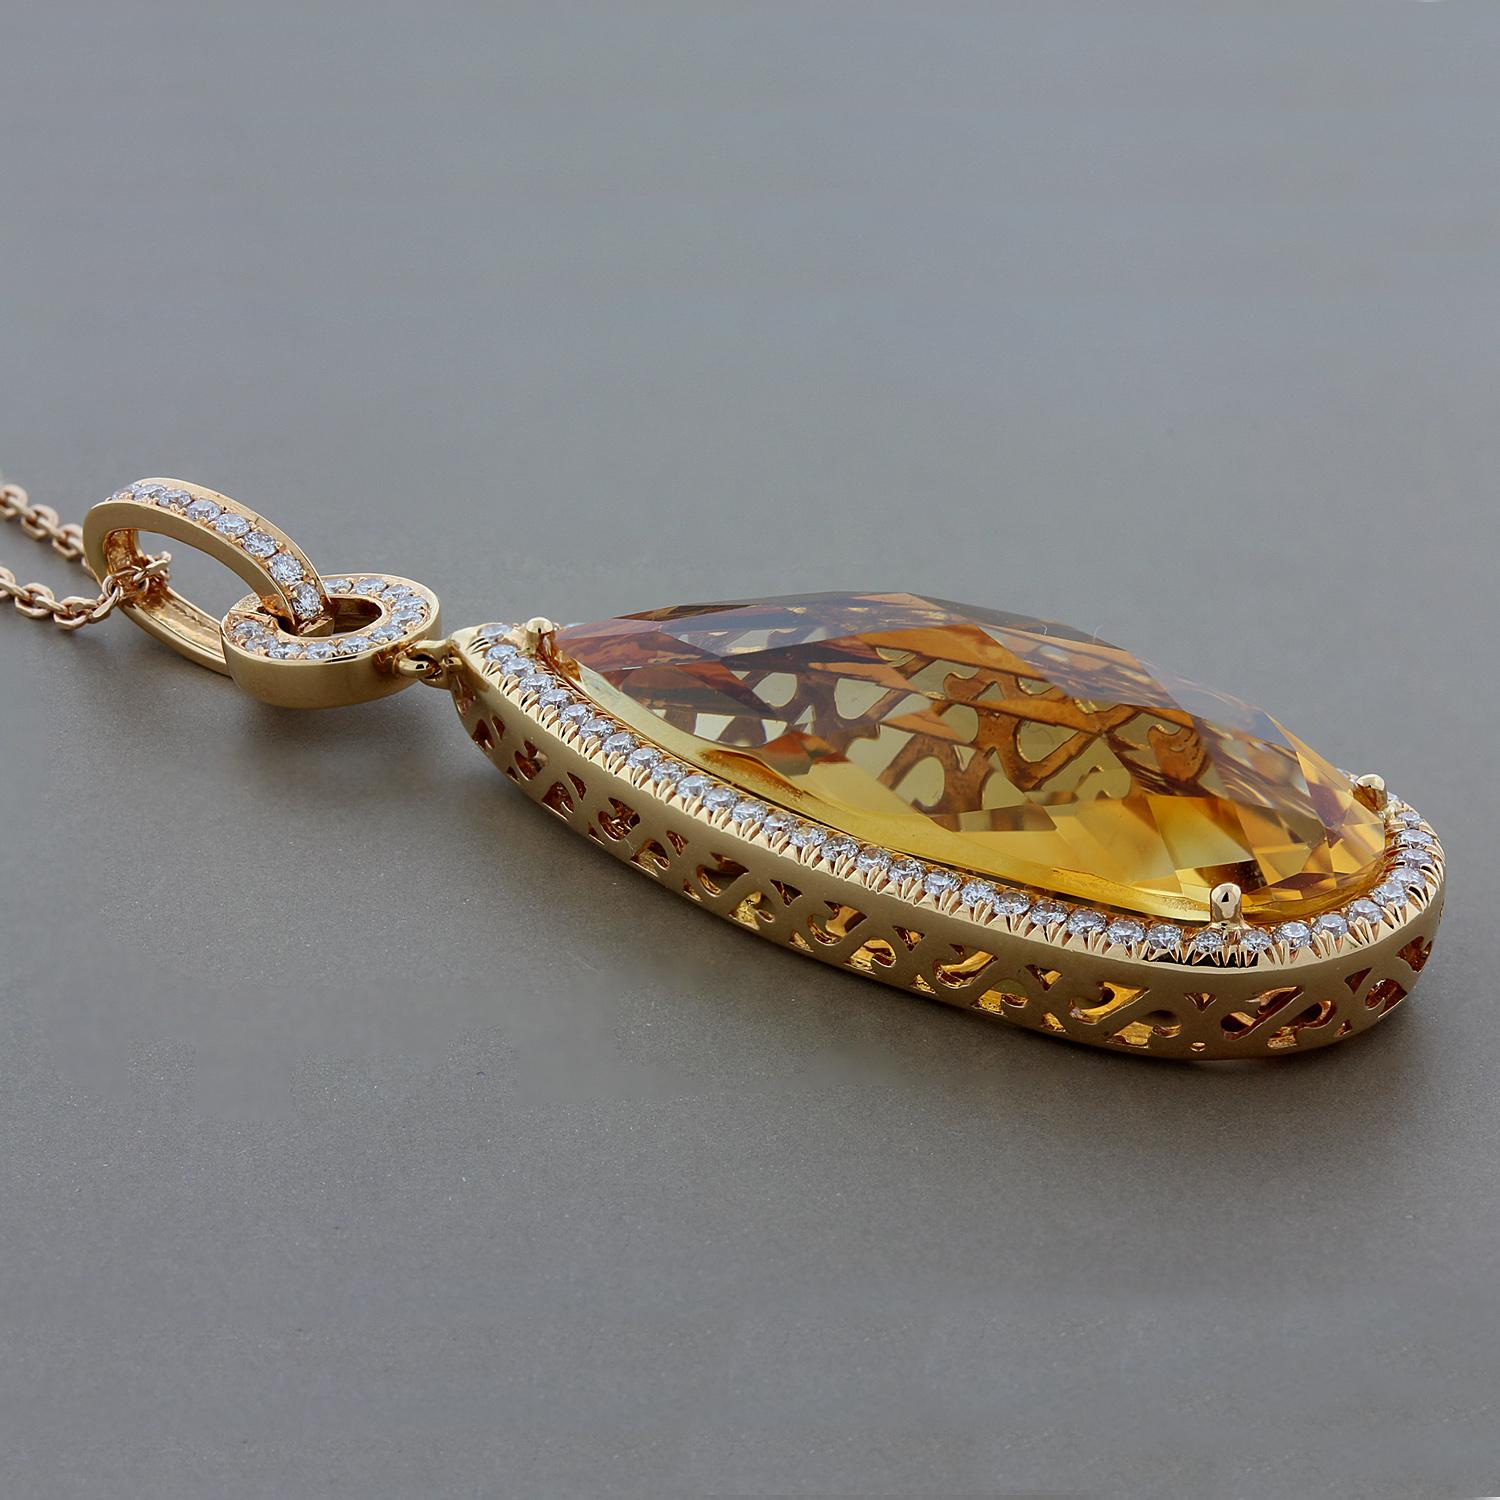 This piece is true show stopper.  The 21.80 carat pear shape citrine is haloed by 0.89 carats of VS quality diamonds.  The back of the pendant is detailed with whimsical heart shapes further accentuating this beautiful pendant.  Set in 18K rose